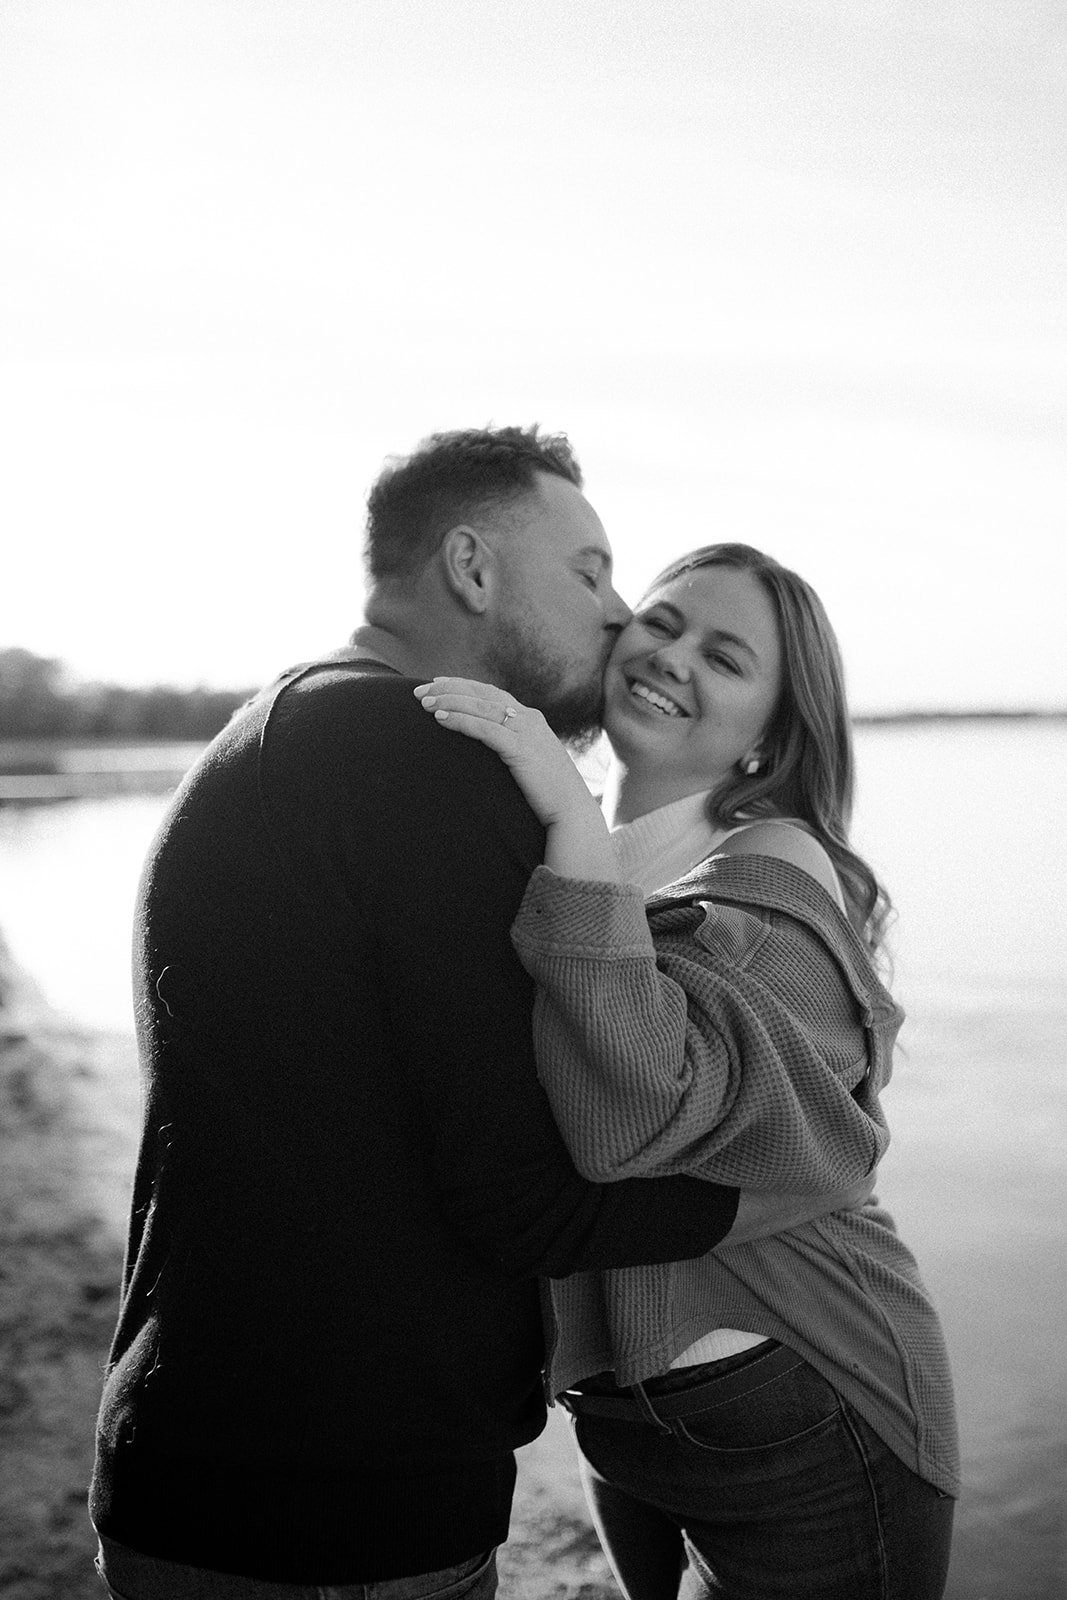 engagement session couple kissing on the cheek at the lake